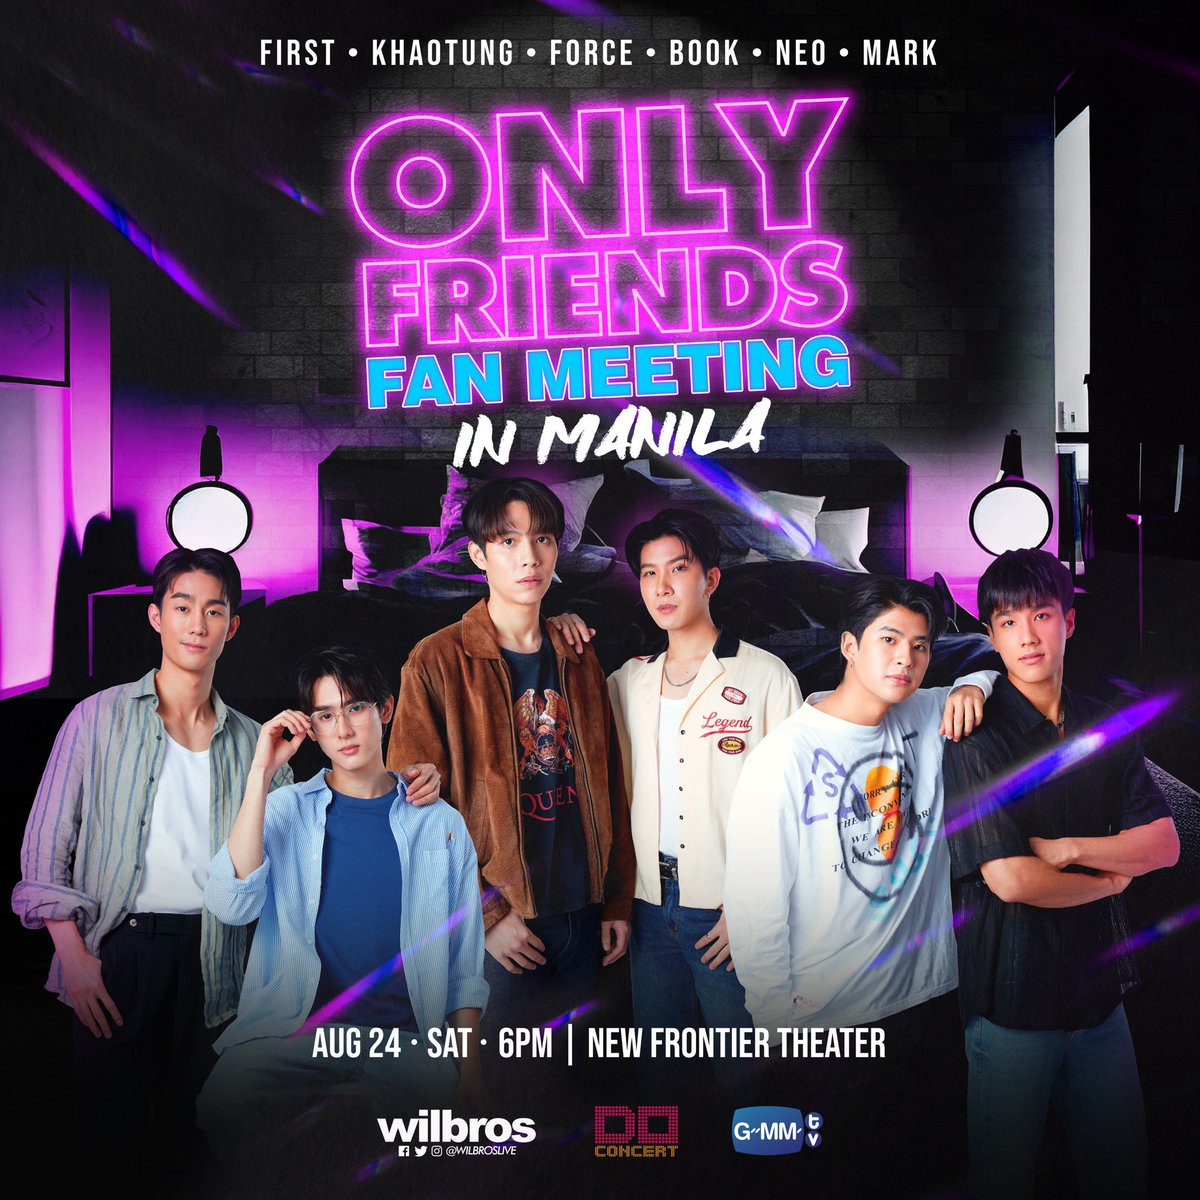 MANILA! 🇵🇭 SIX of Thailand's most promising stars are coming!! Catch 𝐅𝐢𝐫𝐬𝐭, 𝐊𝐡𝐚𝐨𝐭𝐮𝐧𝐠, 𝐅𝐨𝐫𝐜𝐞, 𝐁𝐨𝐨𝐤, 𝐍𝐞𝐨 and 𝐌𝐚𝐫𝐤 in '𝐎𝐍𝐋𝐘 𝐅𝐑𝐈𝐄𝐍𝐃𝐒' Fan Meeting in Manila on August 24 Saturday at the New Frontier Theater ❤️‍🔥❤️‍🔥 Don't miss the excitement.